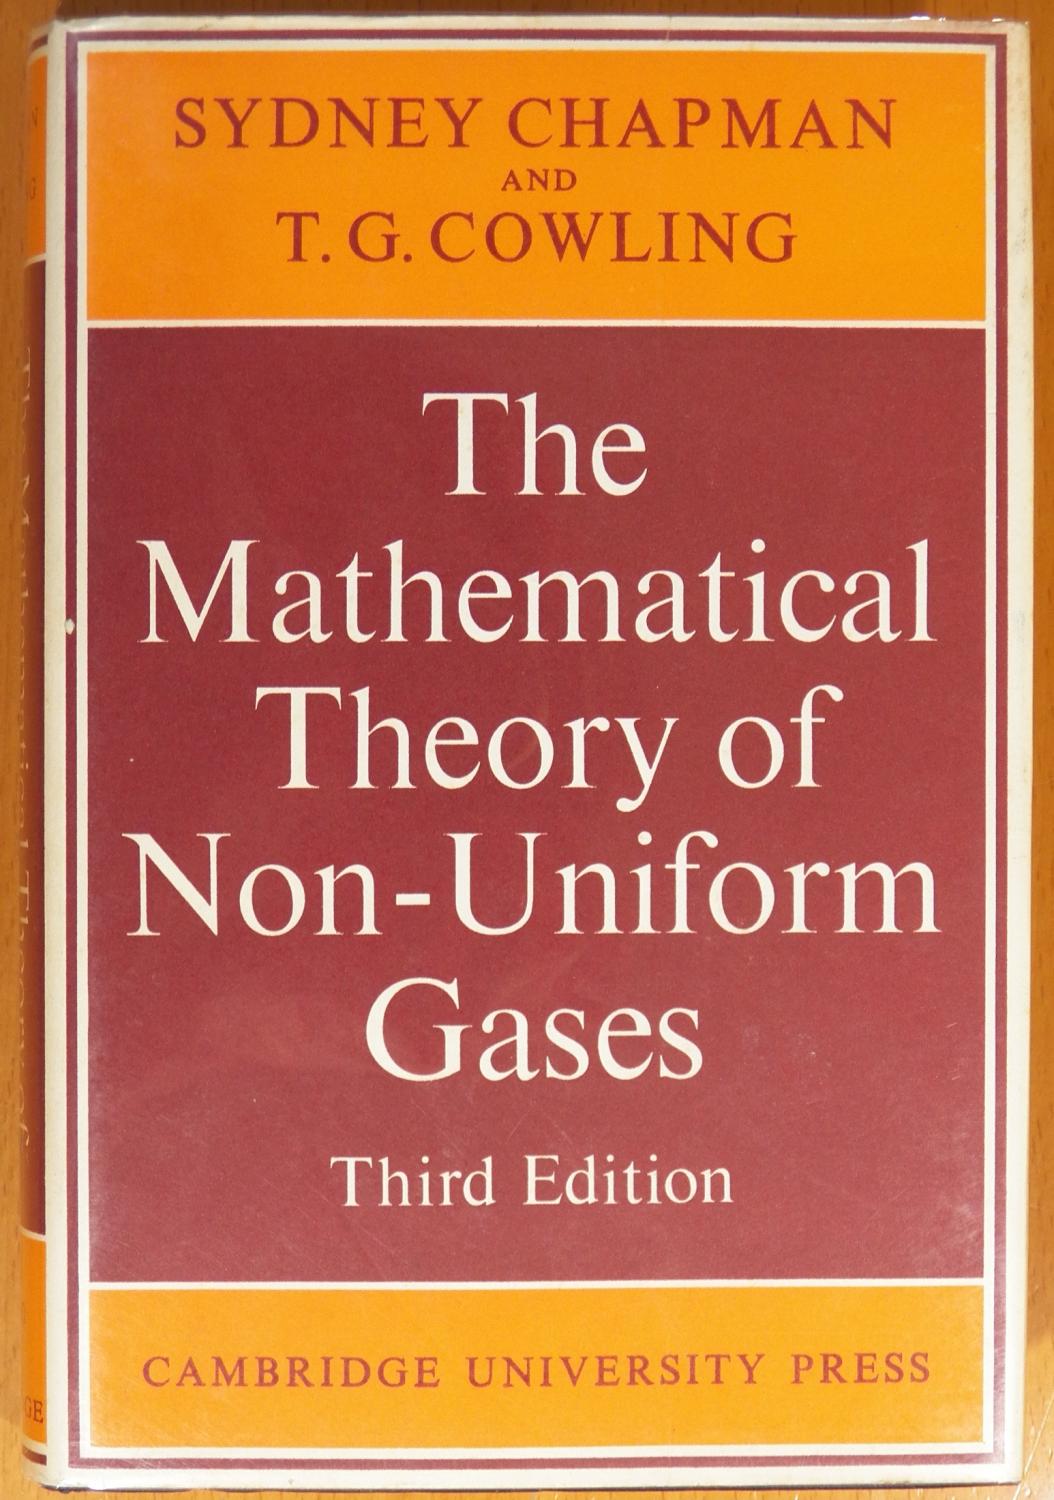 The Mathematical Theory of Non-uniform Gases: An Account of the Kinetic Theory of Viscosity, Thermal Conduction and Diffusion in Gases (Cambridge Mathematical Library)